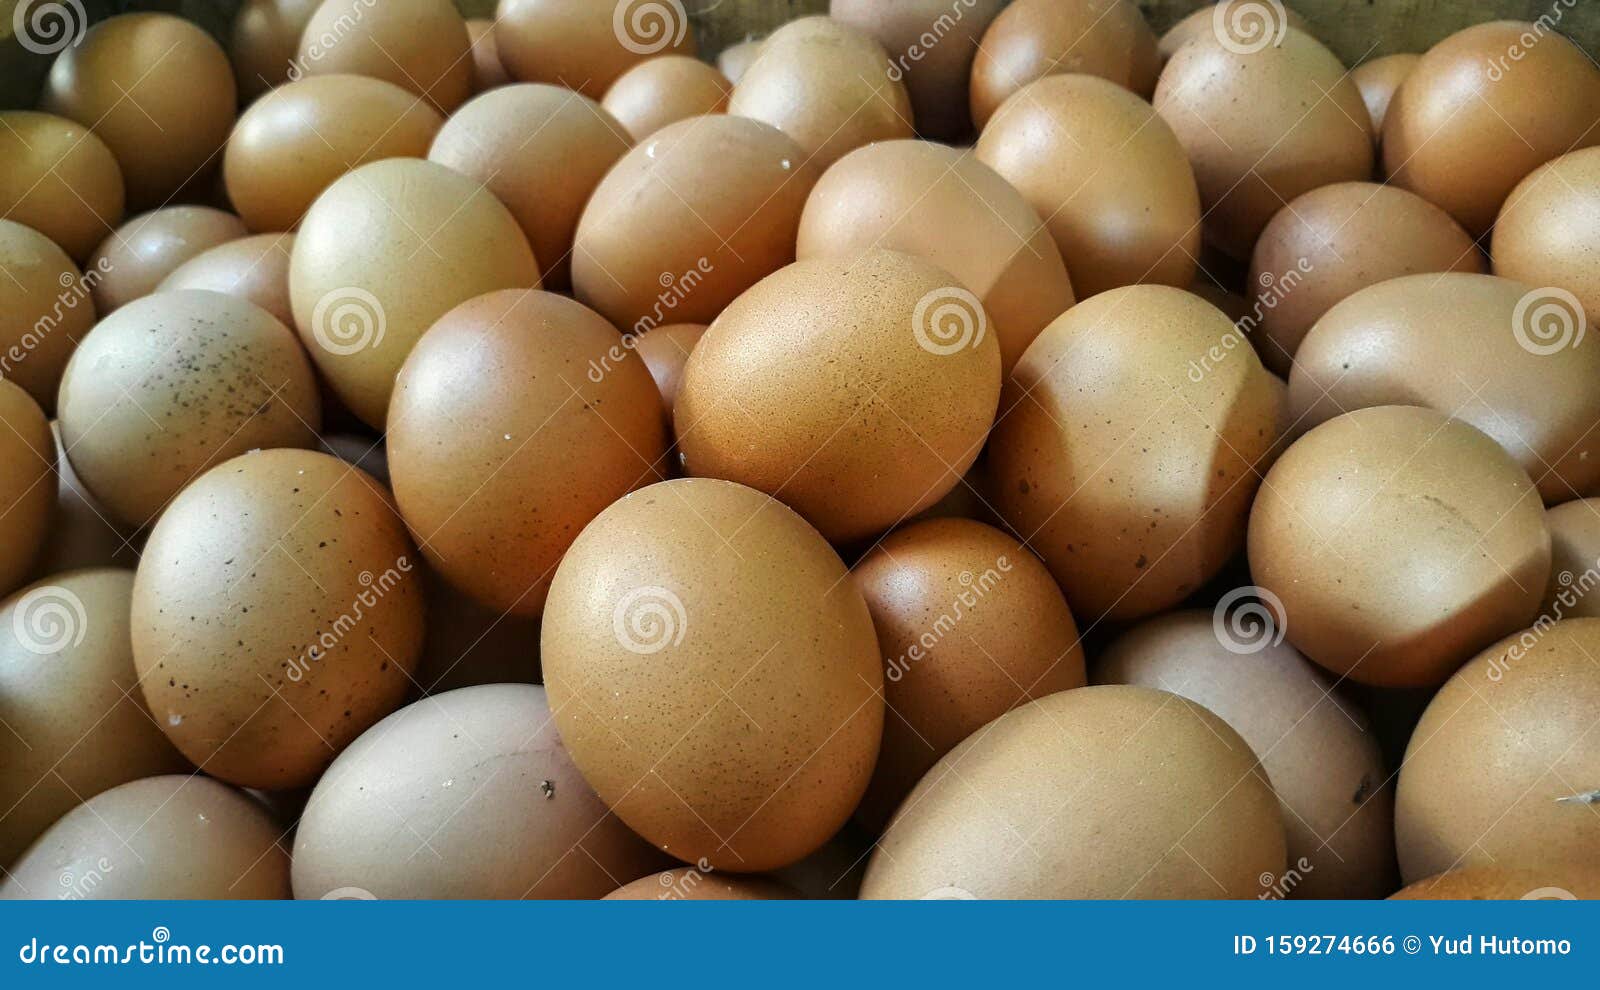 The Lots of Chicken Eggs stock photo. Image of agriculture - 159274666